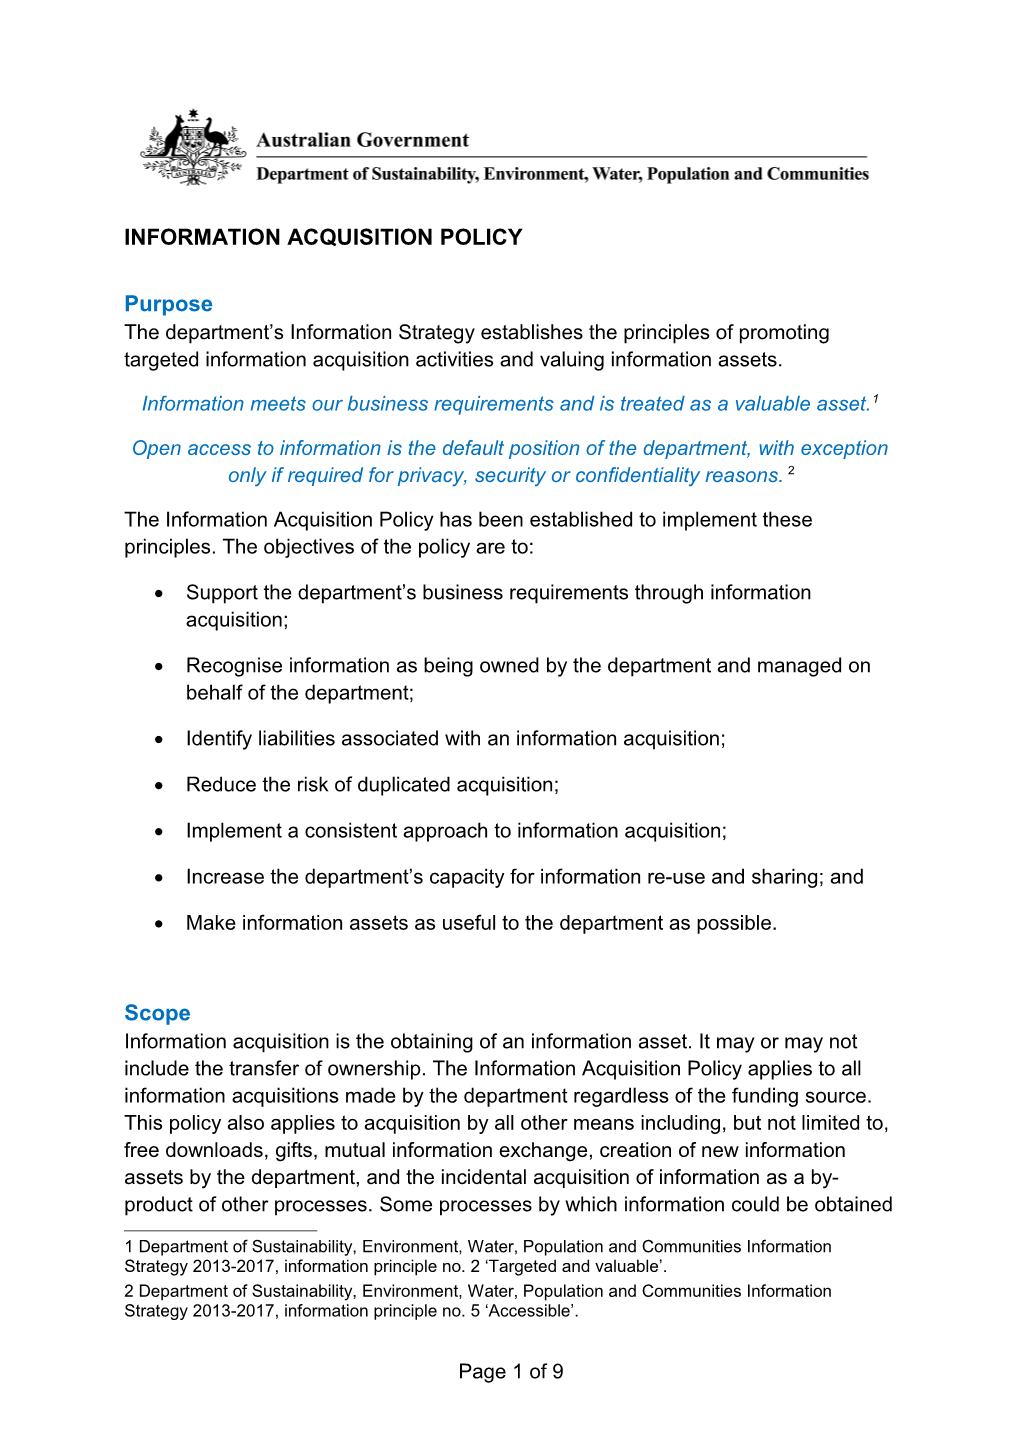 Information Acquisition Policy